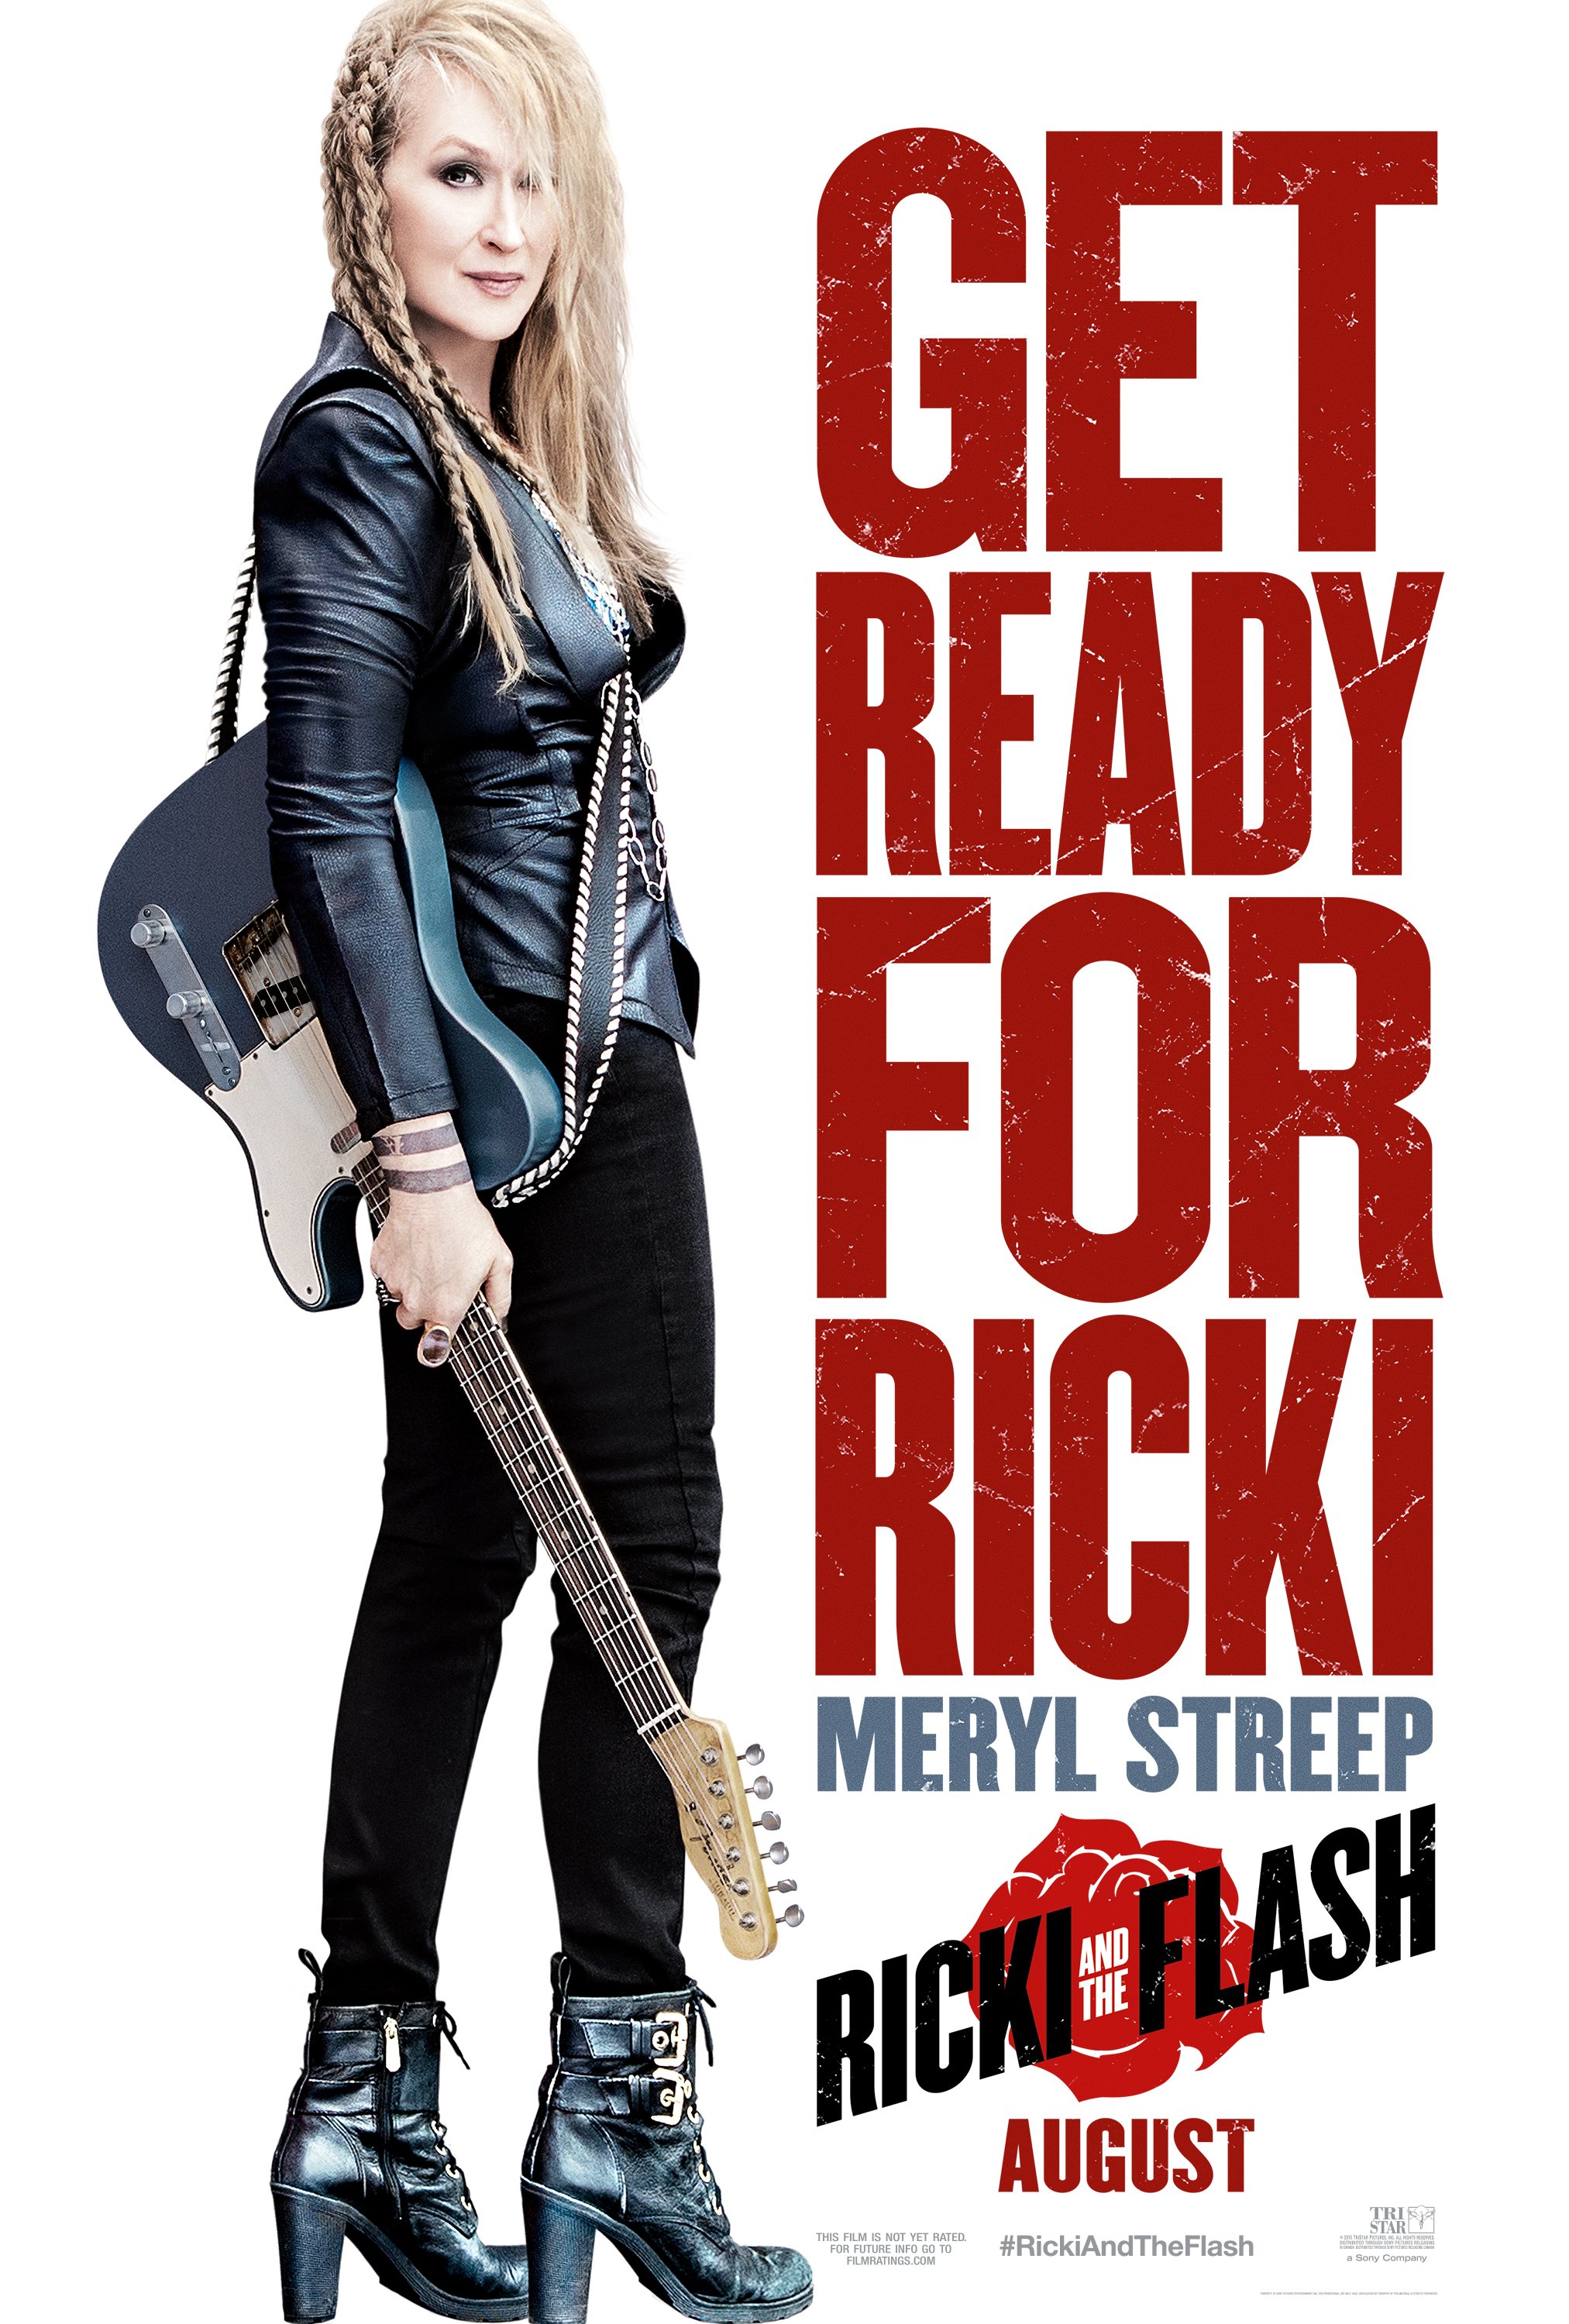 Poster of the movie Ricki and the Flash v.f.